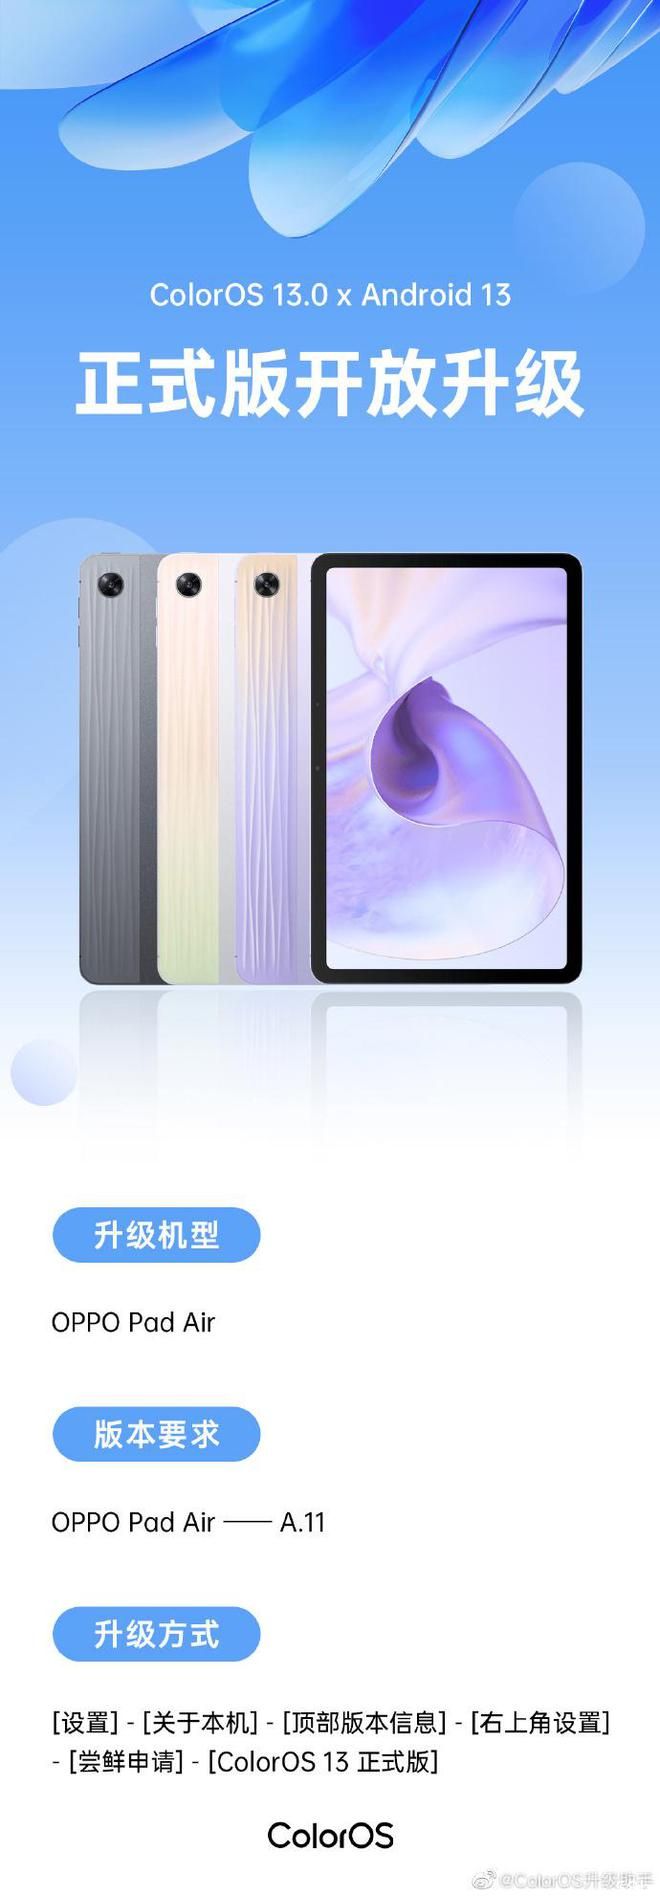 OPPO Pad Air 平板开放 ColorOS 13.0 × Android 13 正式版升级